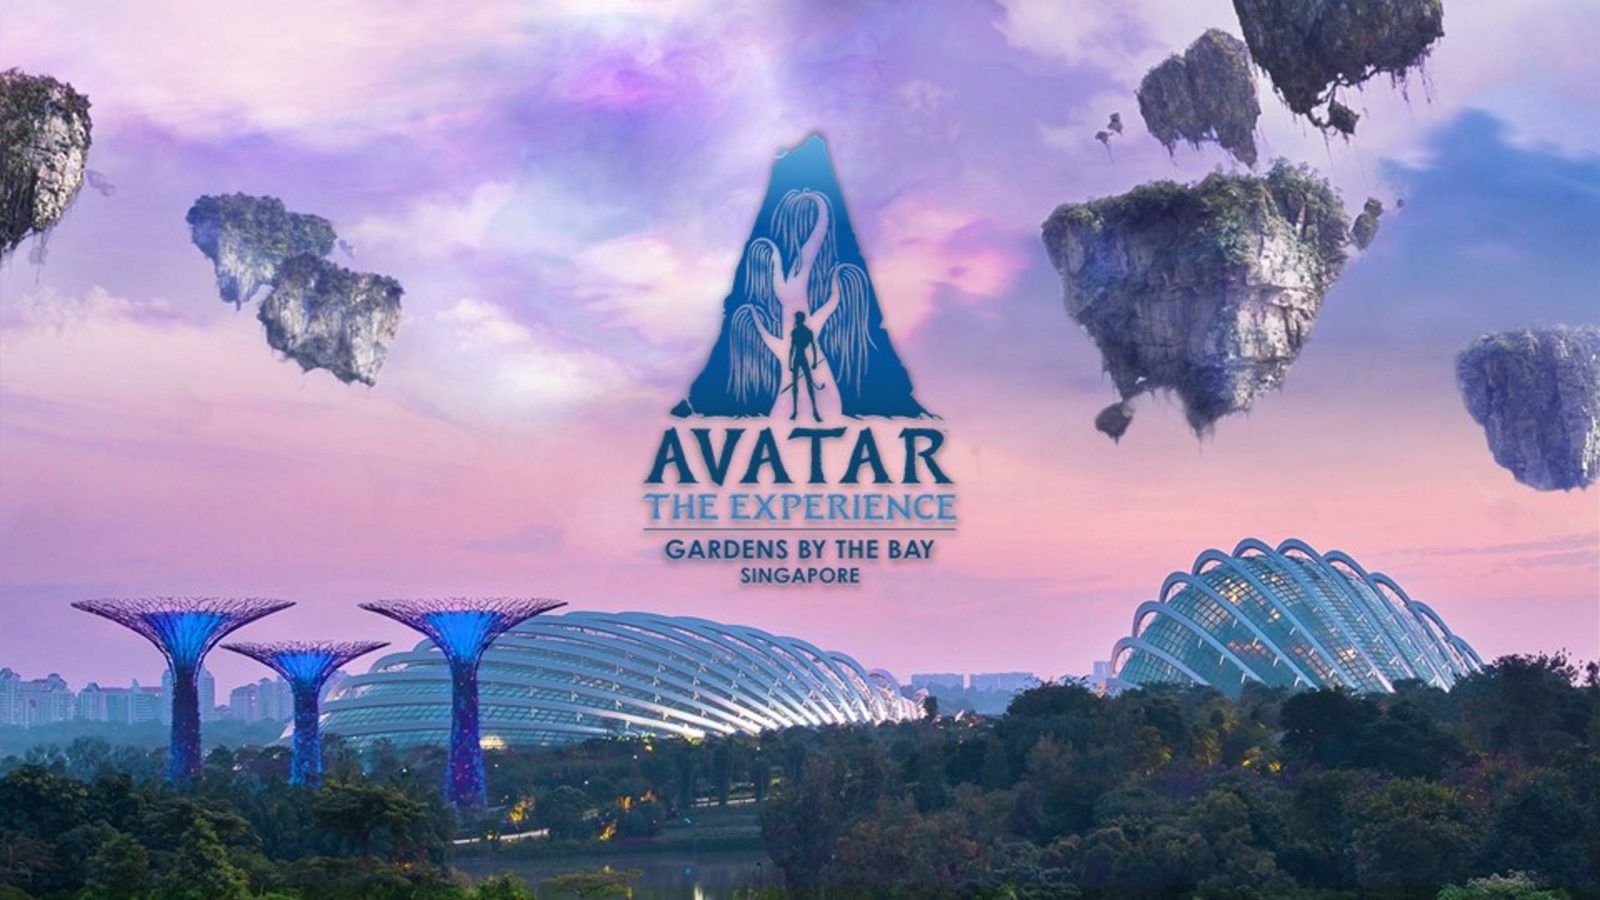 Gardens By The Bay brings Pandora to life with Avatar: The Experience